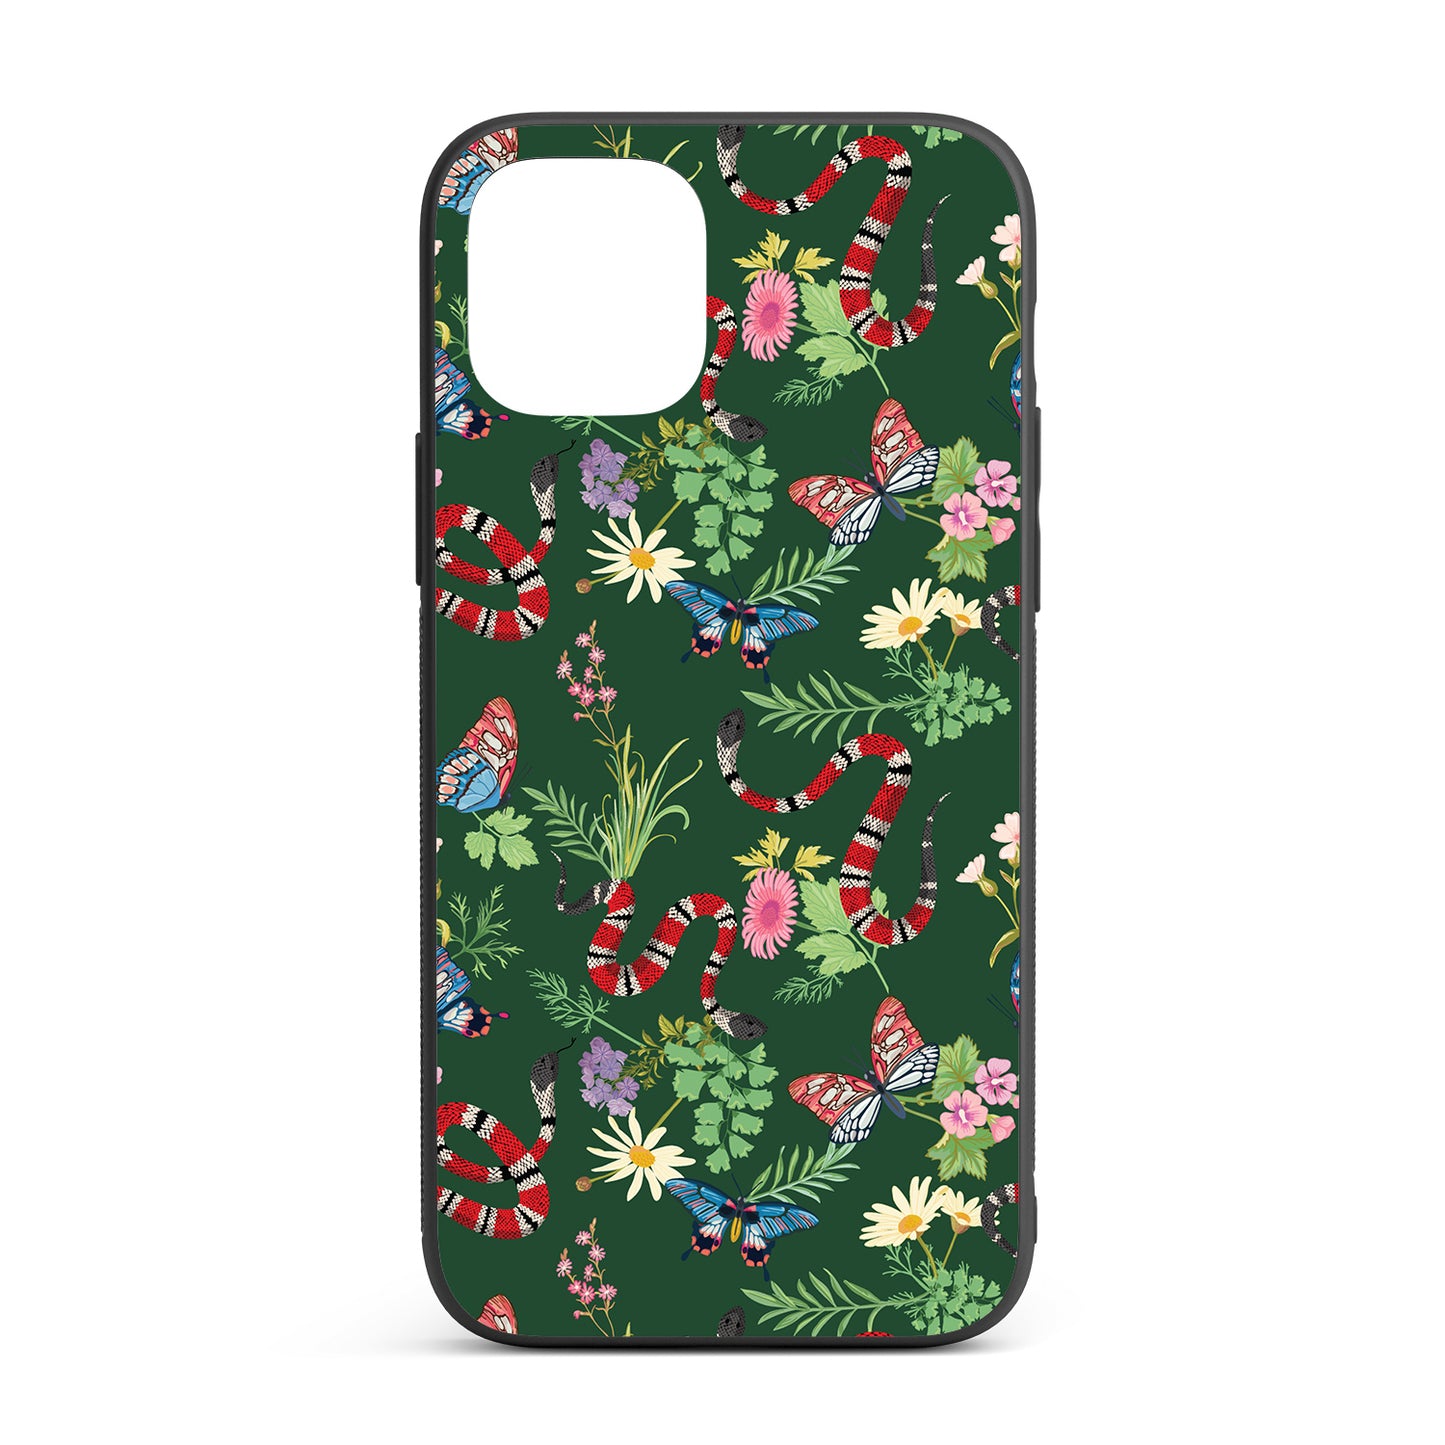 Tropical Chaos iPhone glass case